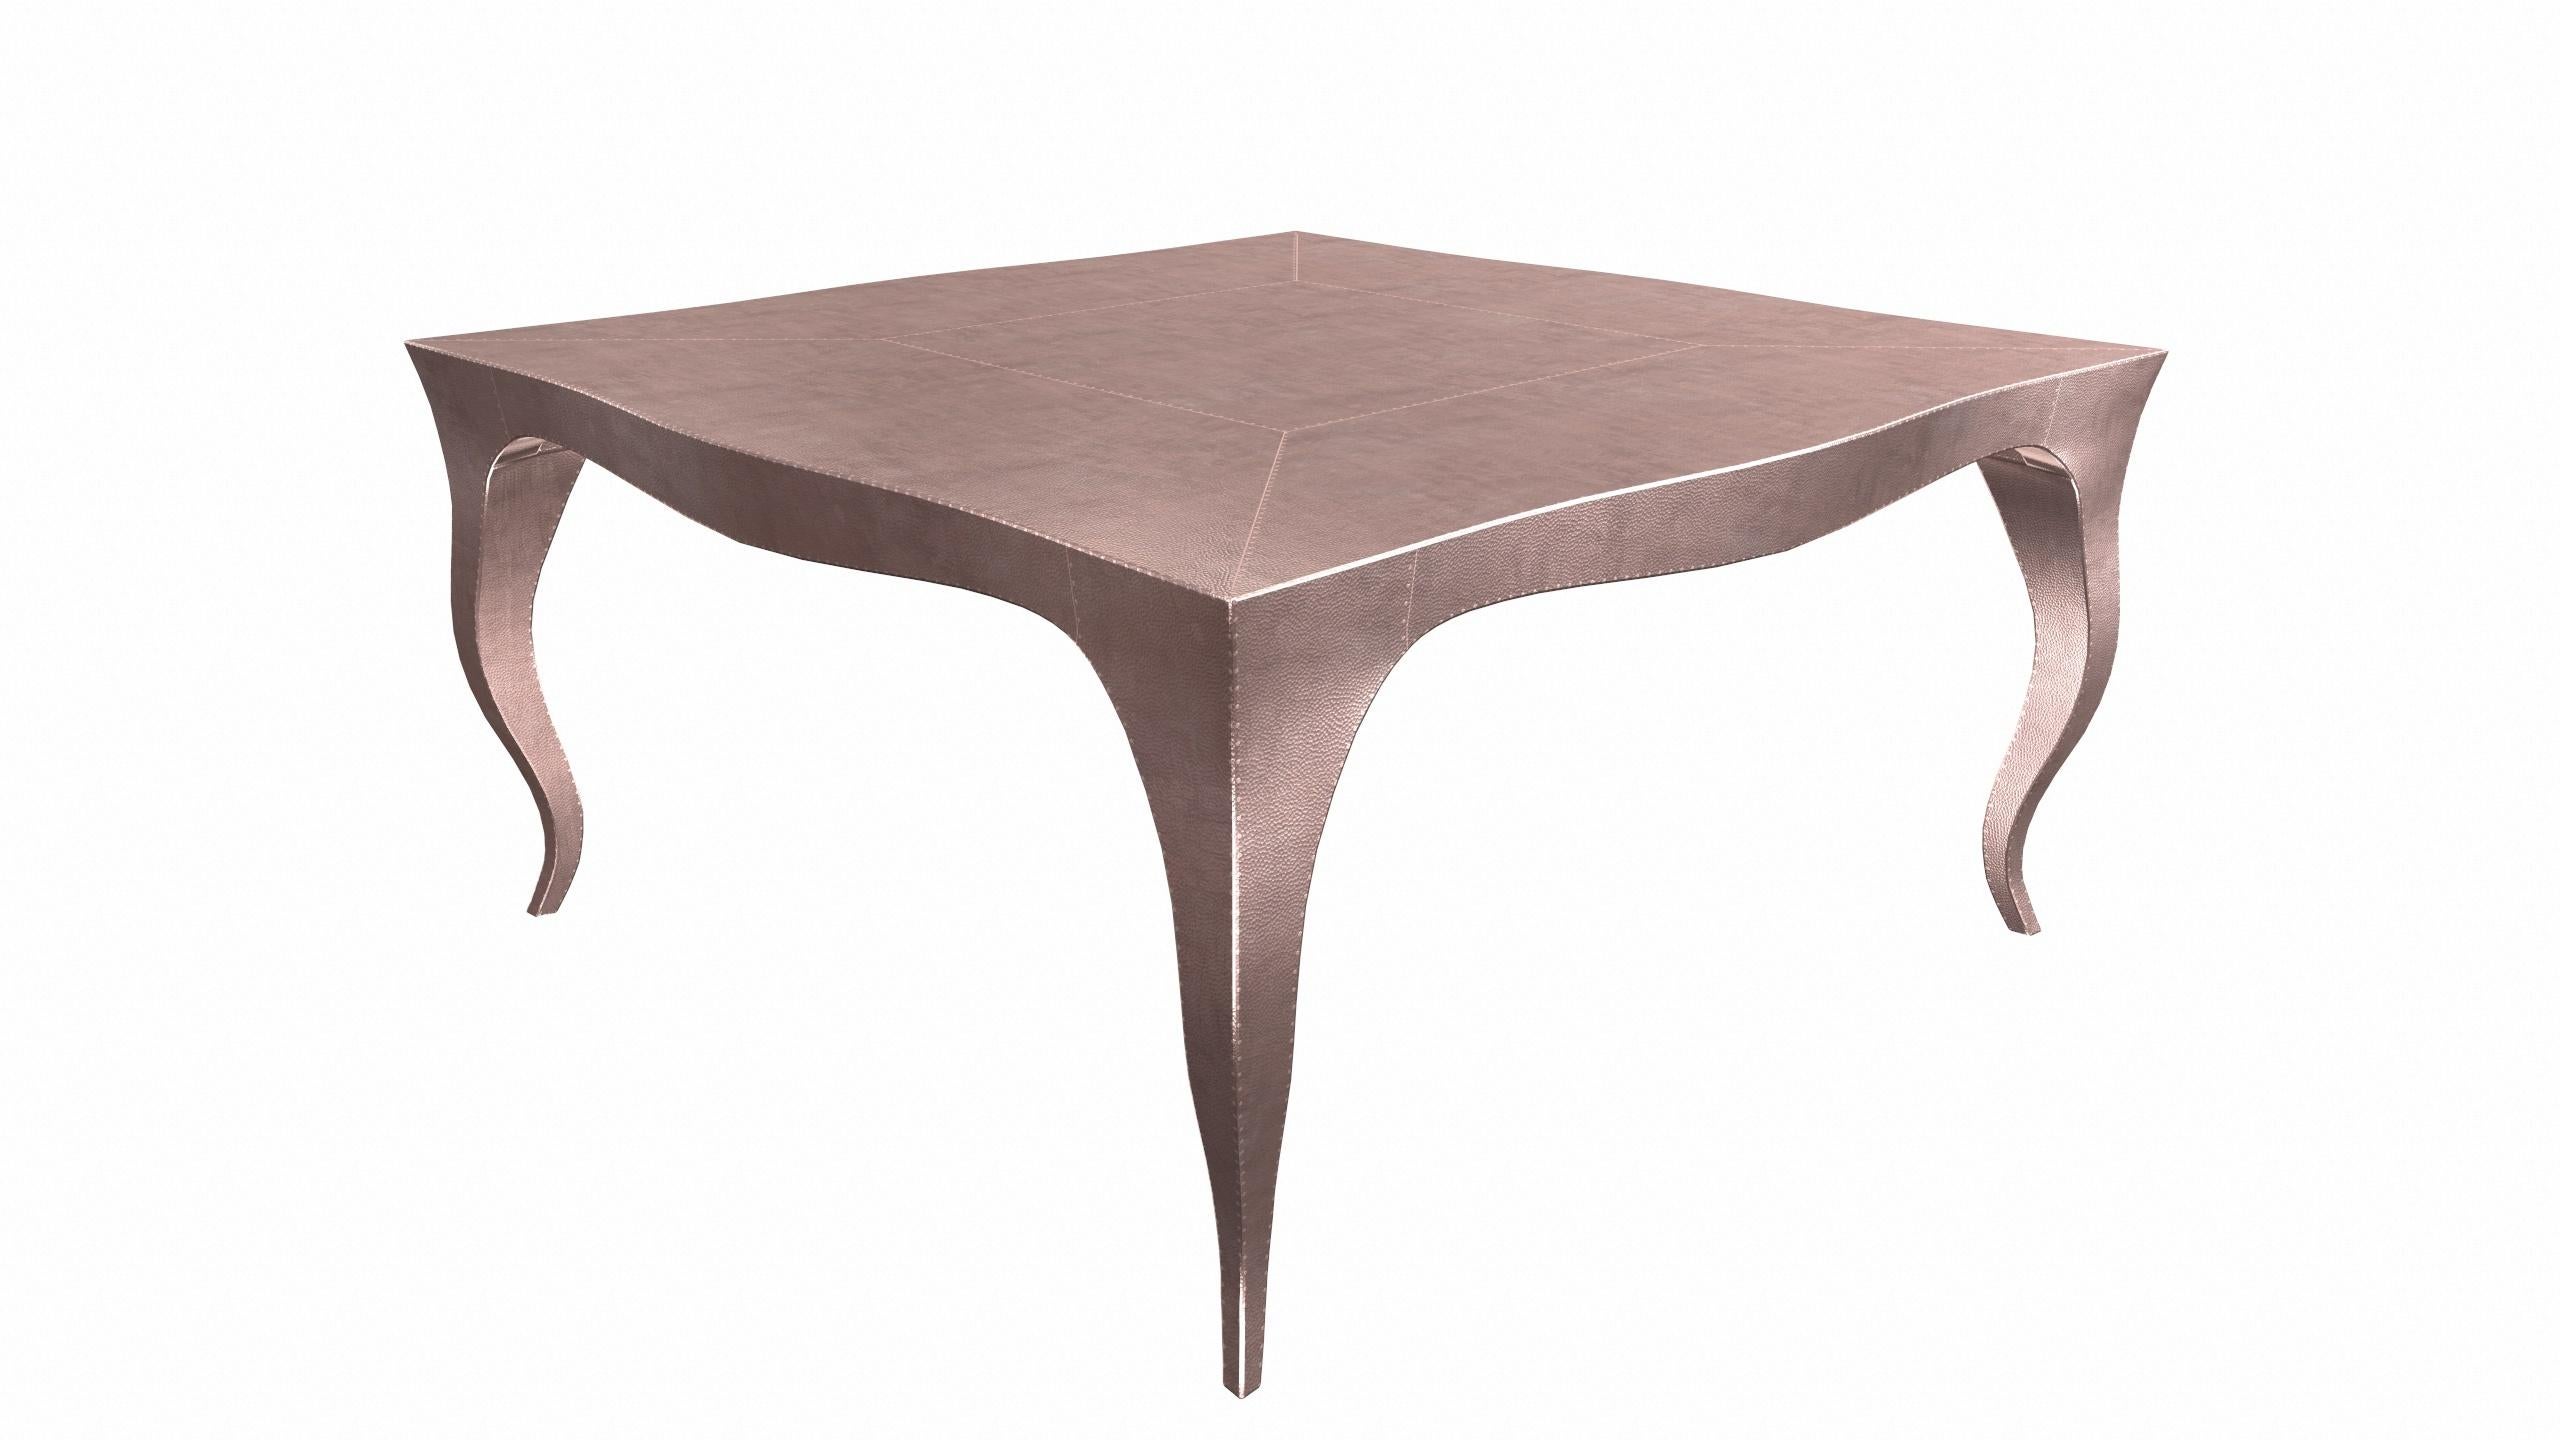 Other Louise Art Deco Nesting Tables and Stacking Tables Mid. Hammered Copper by Paul For Sale